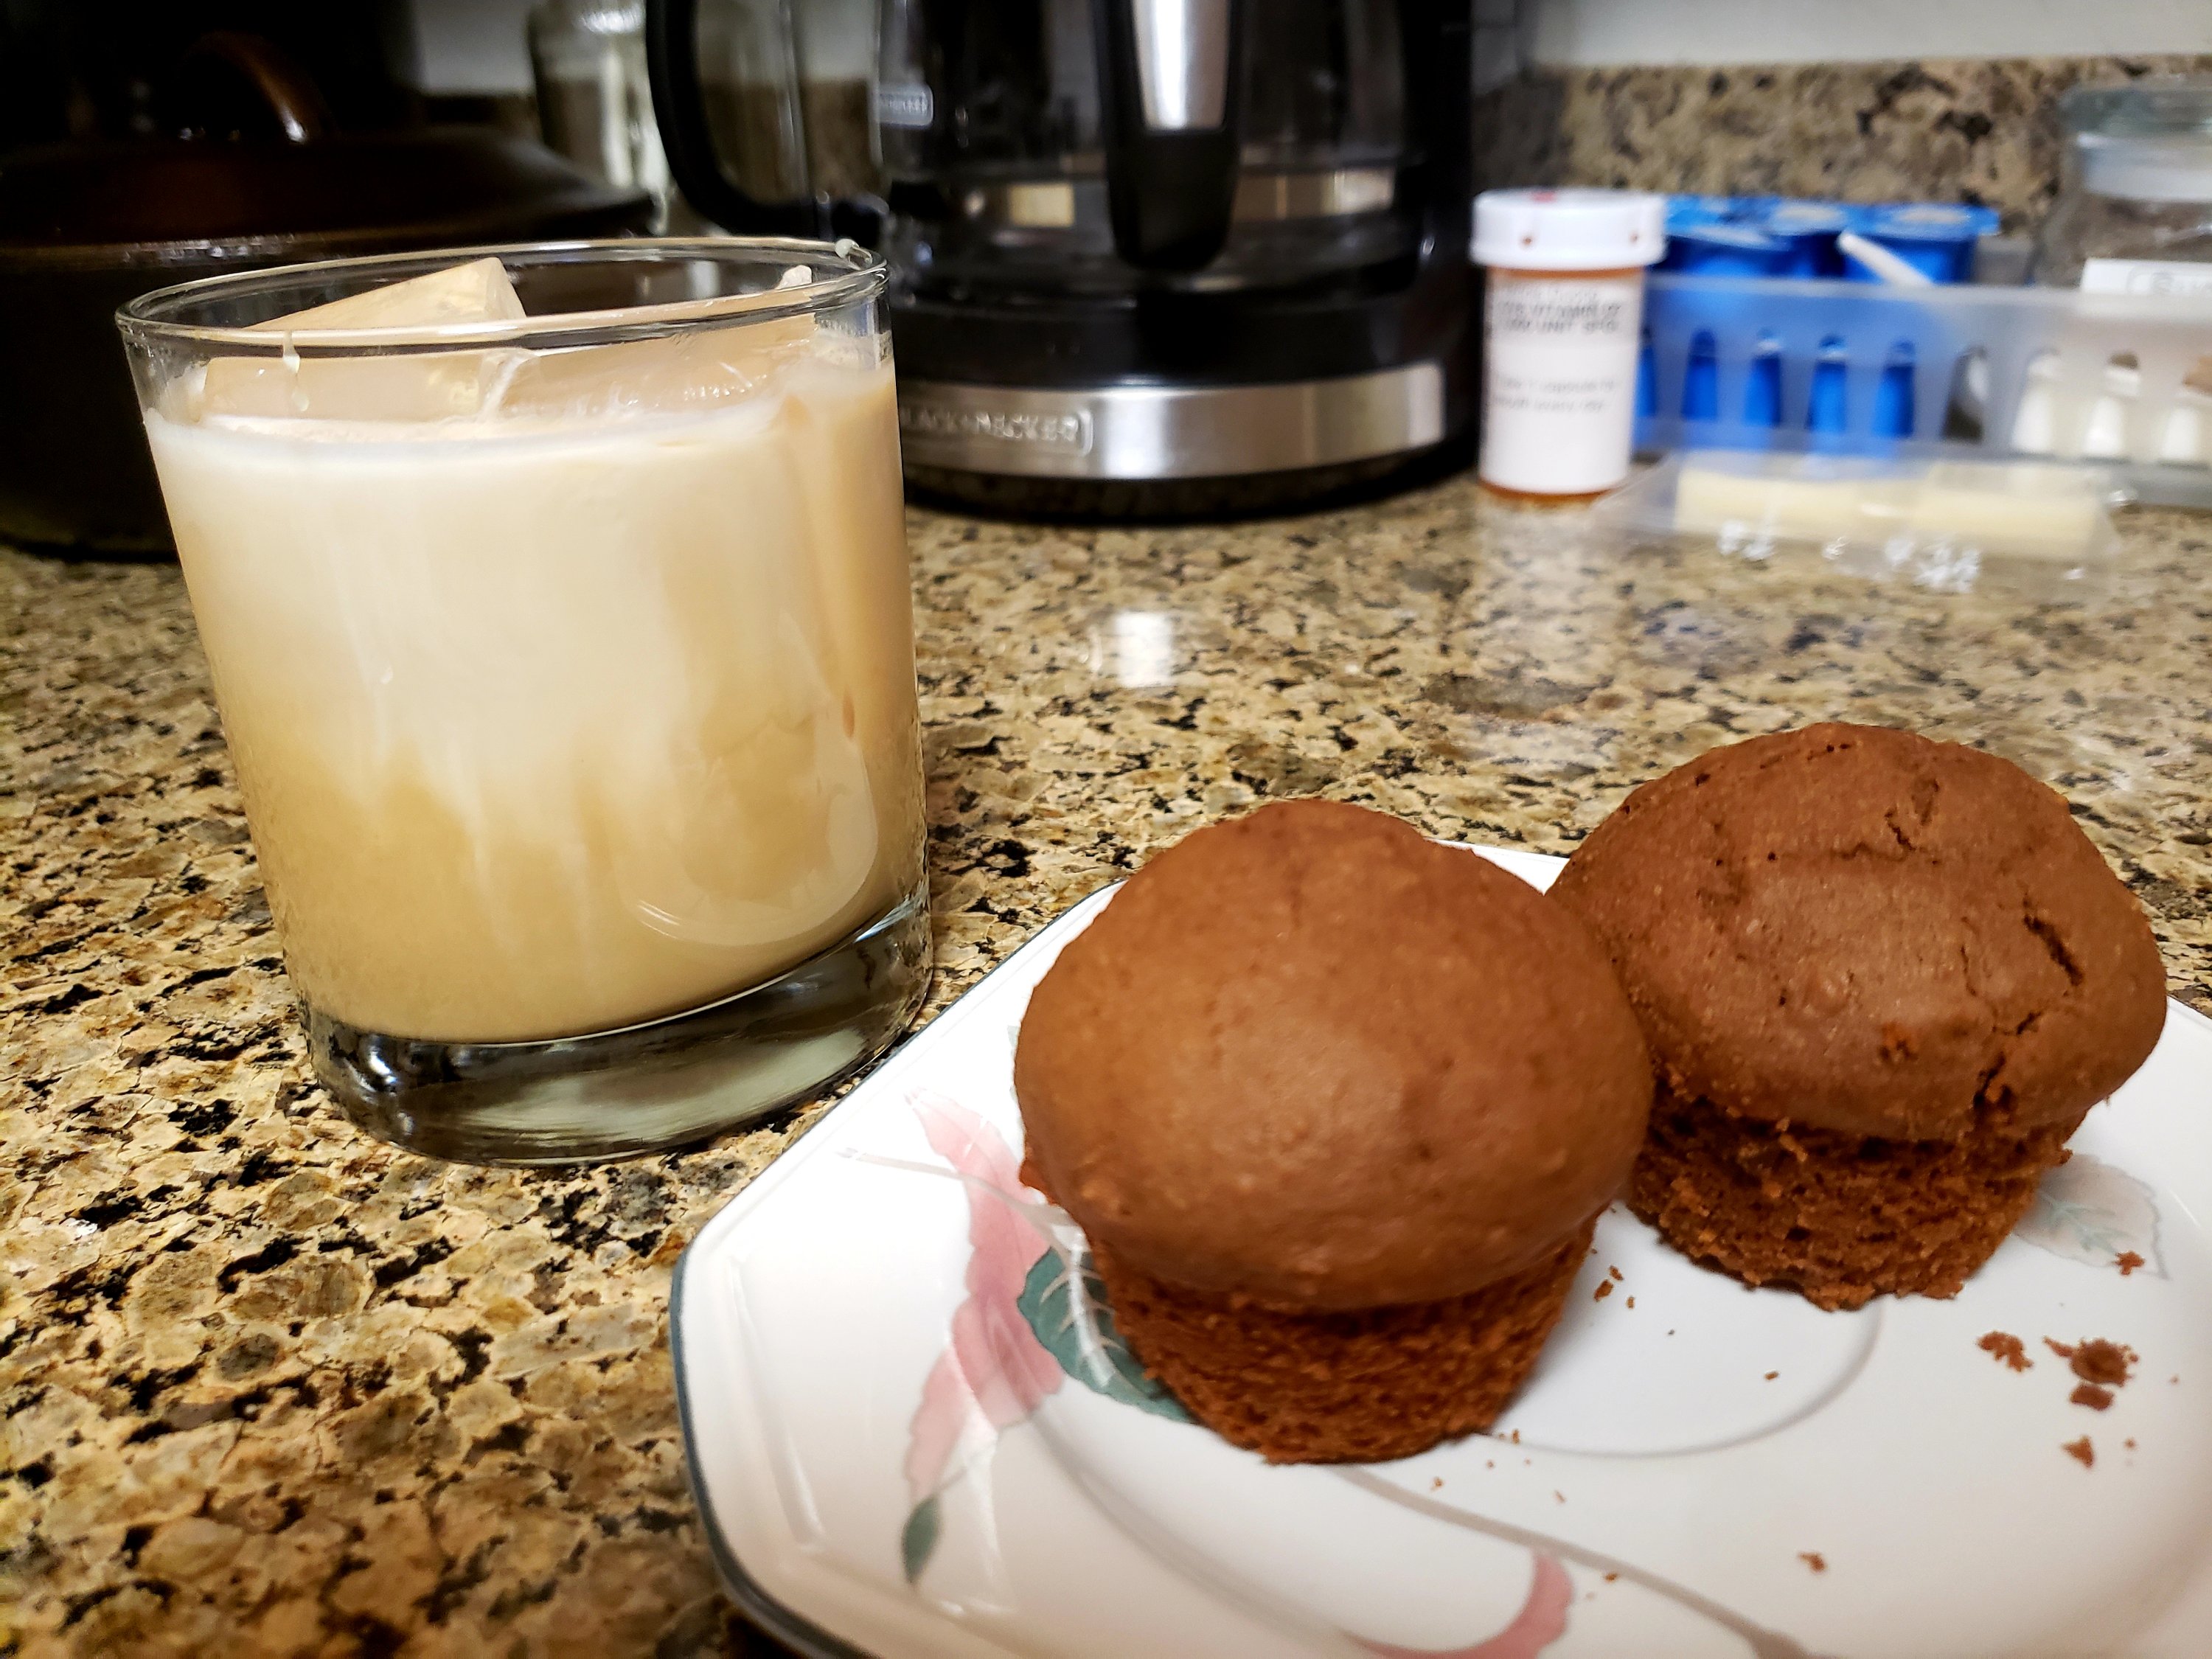 Gf chocolate muffins with a cup of cold brew coffee